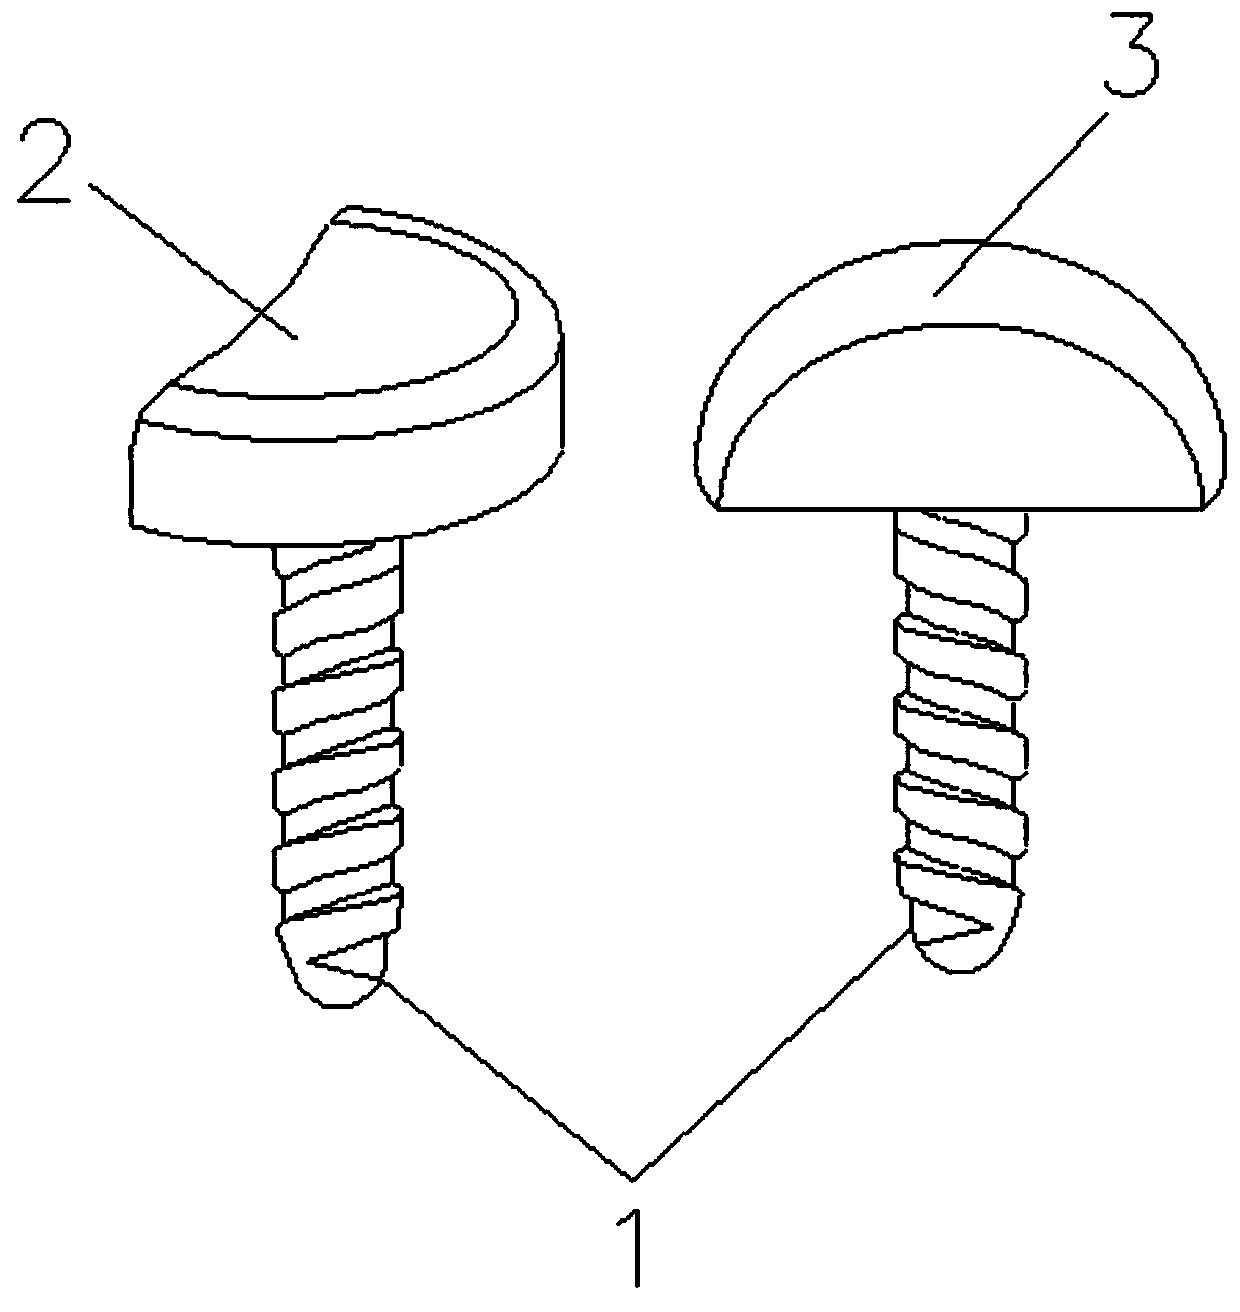 Shoulder joint bone repair and reconstruction device